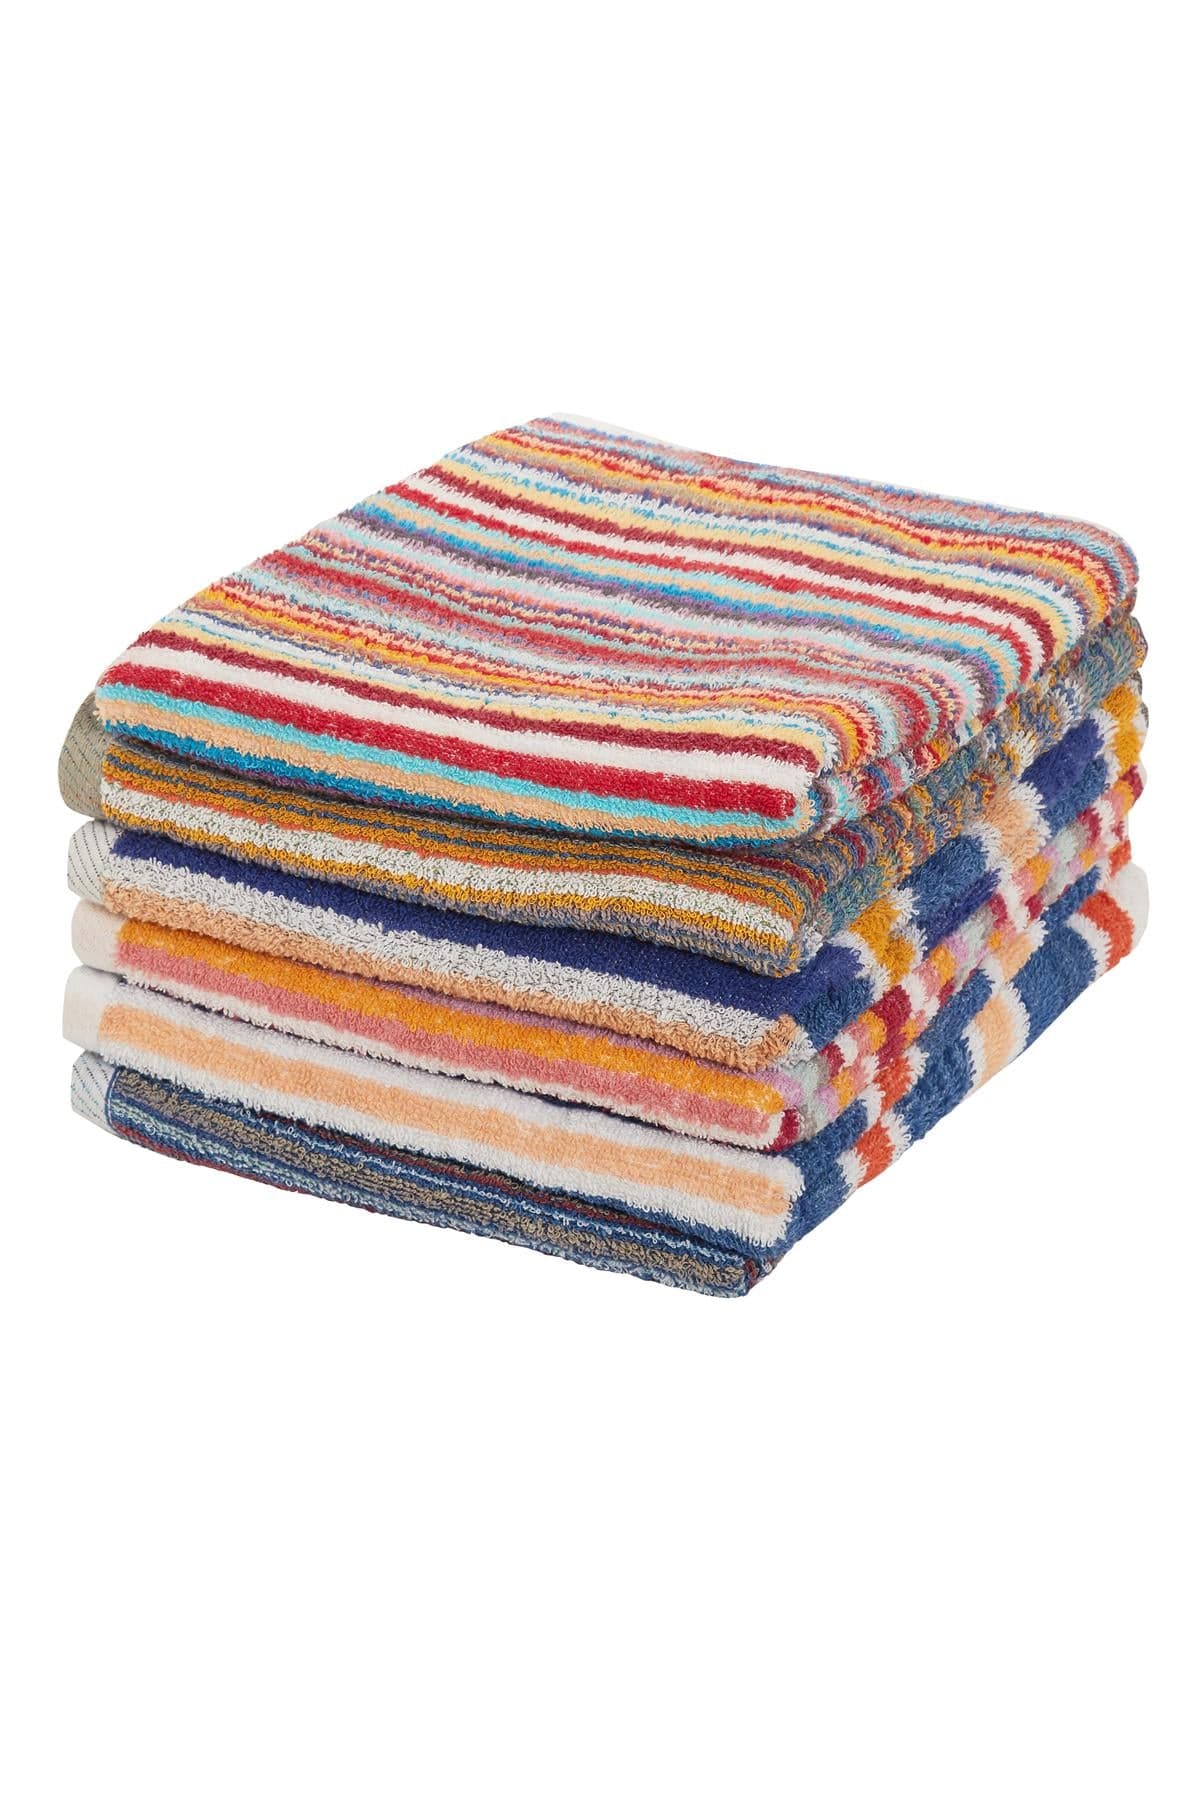 Pack Of 6 Stripe Towels 100% Sustainable Recycled Cotton Towel, Colourful Quick Dry Holiday Gym Beach OLIVIA ROCCO Towel